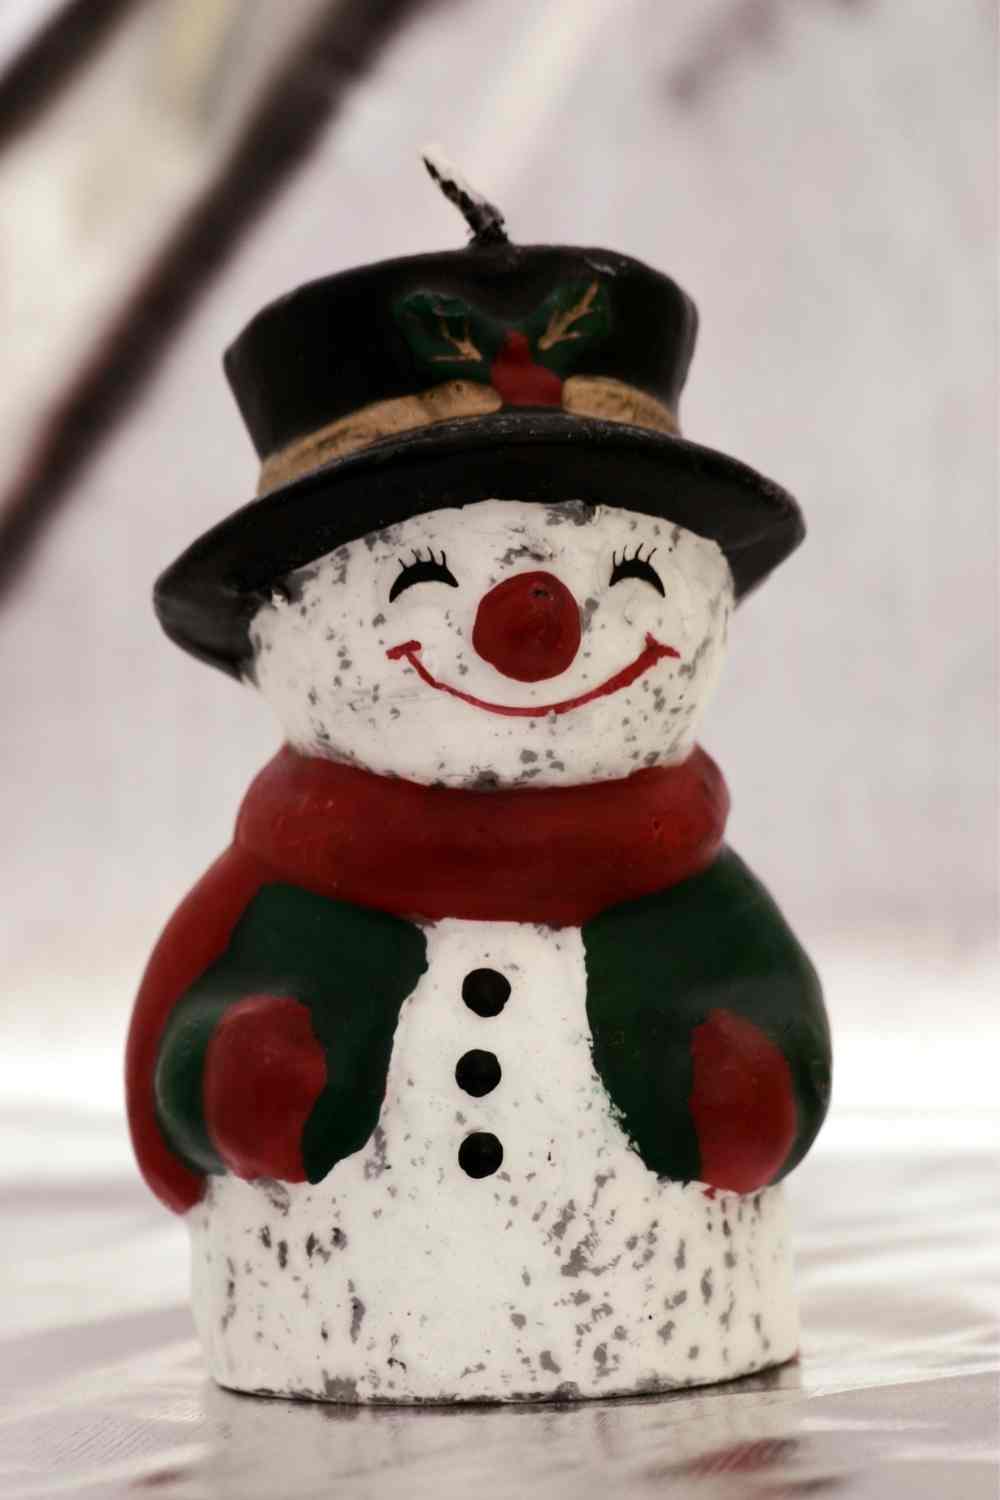 Snowman candles to light up for rooms